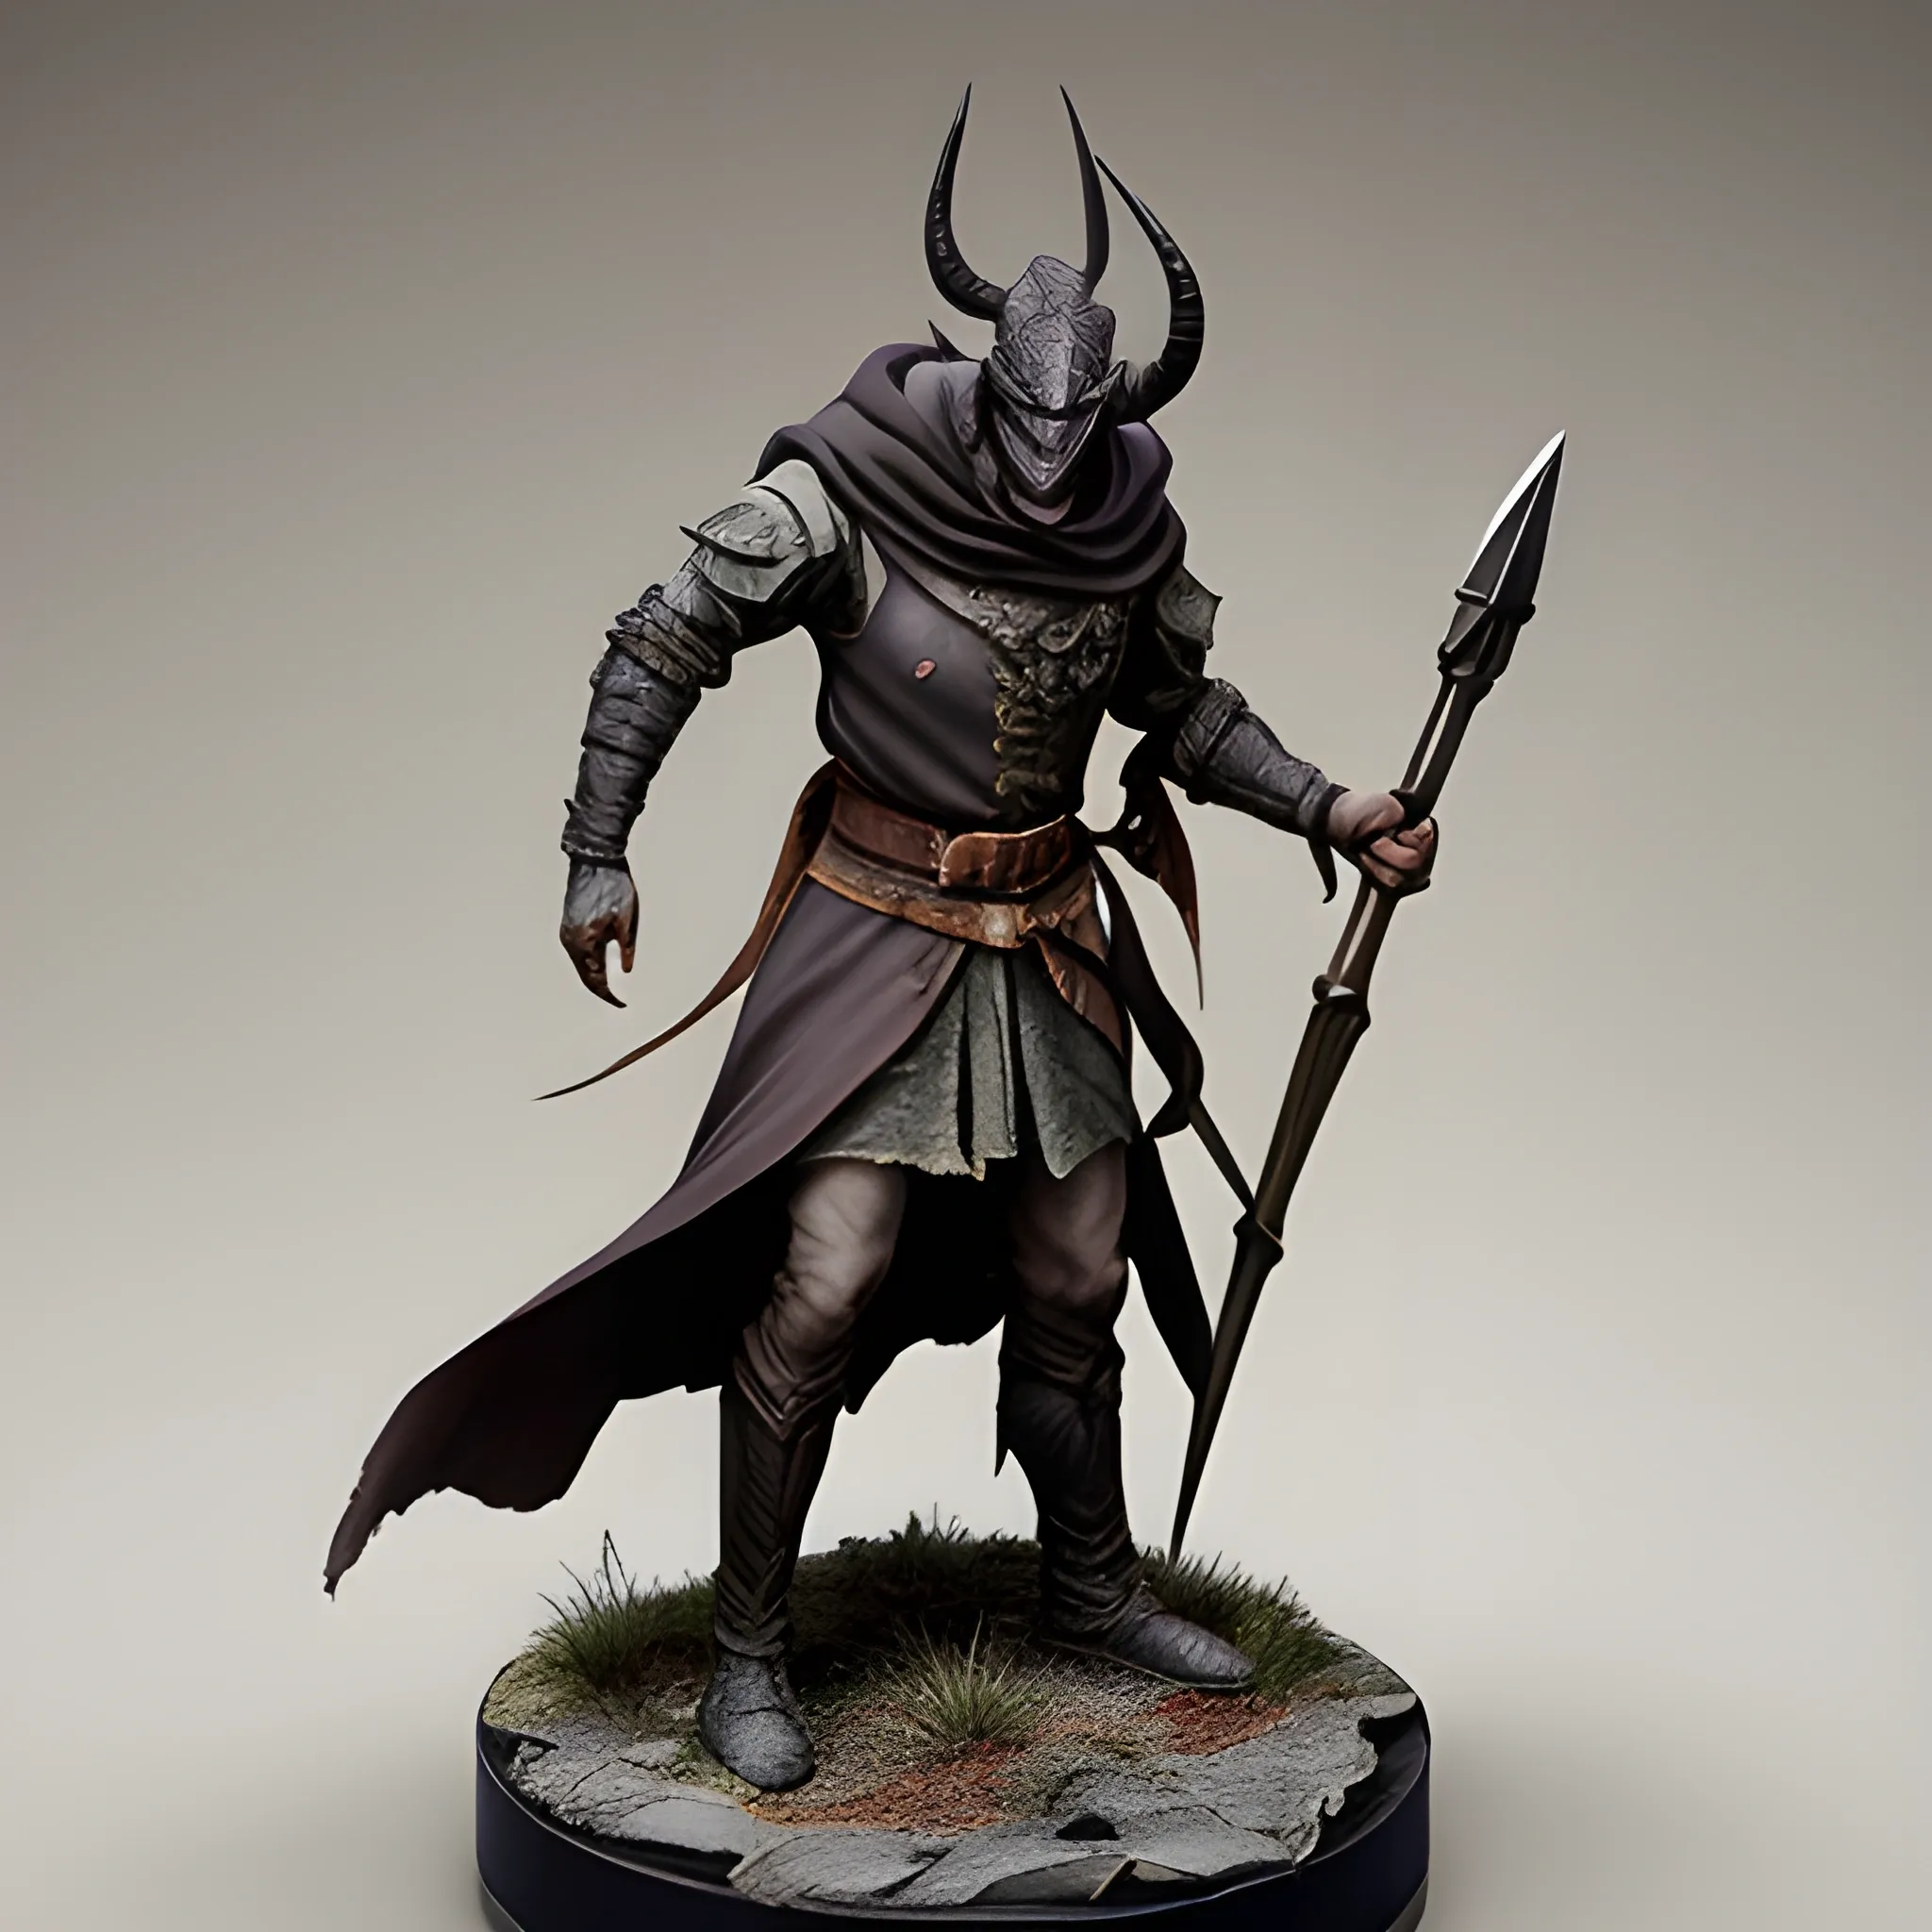 Heinrich stands at a height of around 6 feet, with a lean and athletic build. His Tiefling heritage is evident in his unique physical features, which set him apart from others. His purple skin bears a deep, ashen hue, reminiscent of charcoal. It feels cool to the touch, hinting at his connection to the realm of the undead. Contrasting with his dusky complexion, his eyes gleam with an intense shade of amber, it lost it' s shines years ago.

A pair of big, curved horns emerge from his forehead, curling back. They are smooth and polished, a testament to his meticulous care and grooming. Along with his horns, Heinrich possesses a set of pointed, elven-like ears, elongated and tapering to a fine point. His jet-black hair, sleek and straight, falls to his shoulders, framing his face in a sharp and stylish manner.

Heinrich's countenance reflects his sorrowful past. There is a lingering sadness in his eyes, a weight that only comes from carrying the burden of forgotten sins. His facial features are sharp and defined, with a strong jawline that speaks of determination and resolve. However, his expression often bears a hint of weariness and pensiveness, as if he is constantly reflecting on his past actions and seeking answers that lie just beyond his reach.

Dressed in practical and nondescript attire, Heinrich favors dark, muted colors such as deep blues, grays, and blacks. He dons a long, weathered cloak that helps him blend into the shadows, its tattered edges revealing the signs of countless journeys and battles. His armor, made from lightweight materials, allows for agile movement without compromising protection. Strapped to his back is a well-crafted bow, accompanied by a quiver of arrows, emphasizing his skill as a ranger.

Heinrich carries himself with a quiet confidence, though there is an air of restraint about him. He moves with grace and precision, every step deliberate and measured. Though his appearance may evoke a sense of mystery and apprehension in those unfamiliar with Tieflings, those who take the time to know him will find a soul burdened by the weight of past transgressions, seeking redemption in a world that is both harsh and forgiving.